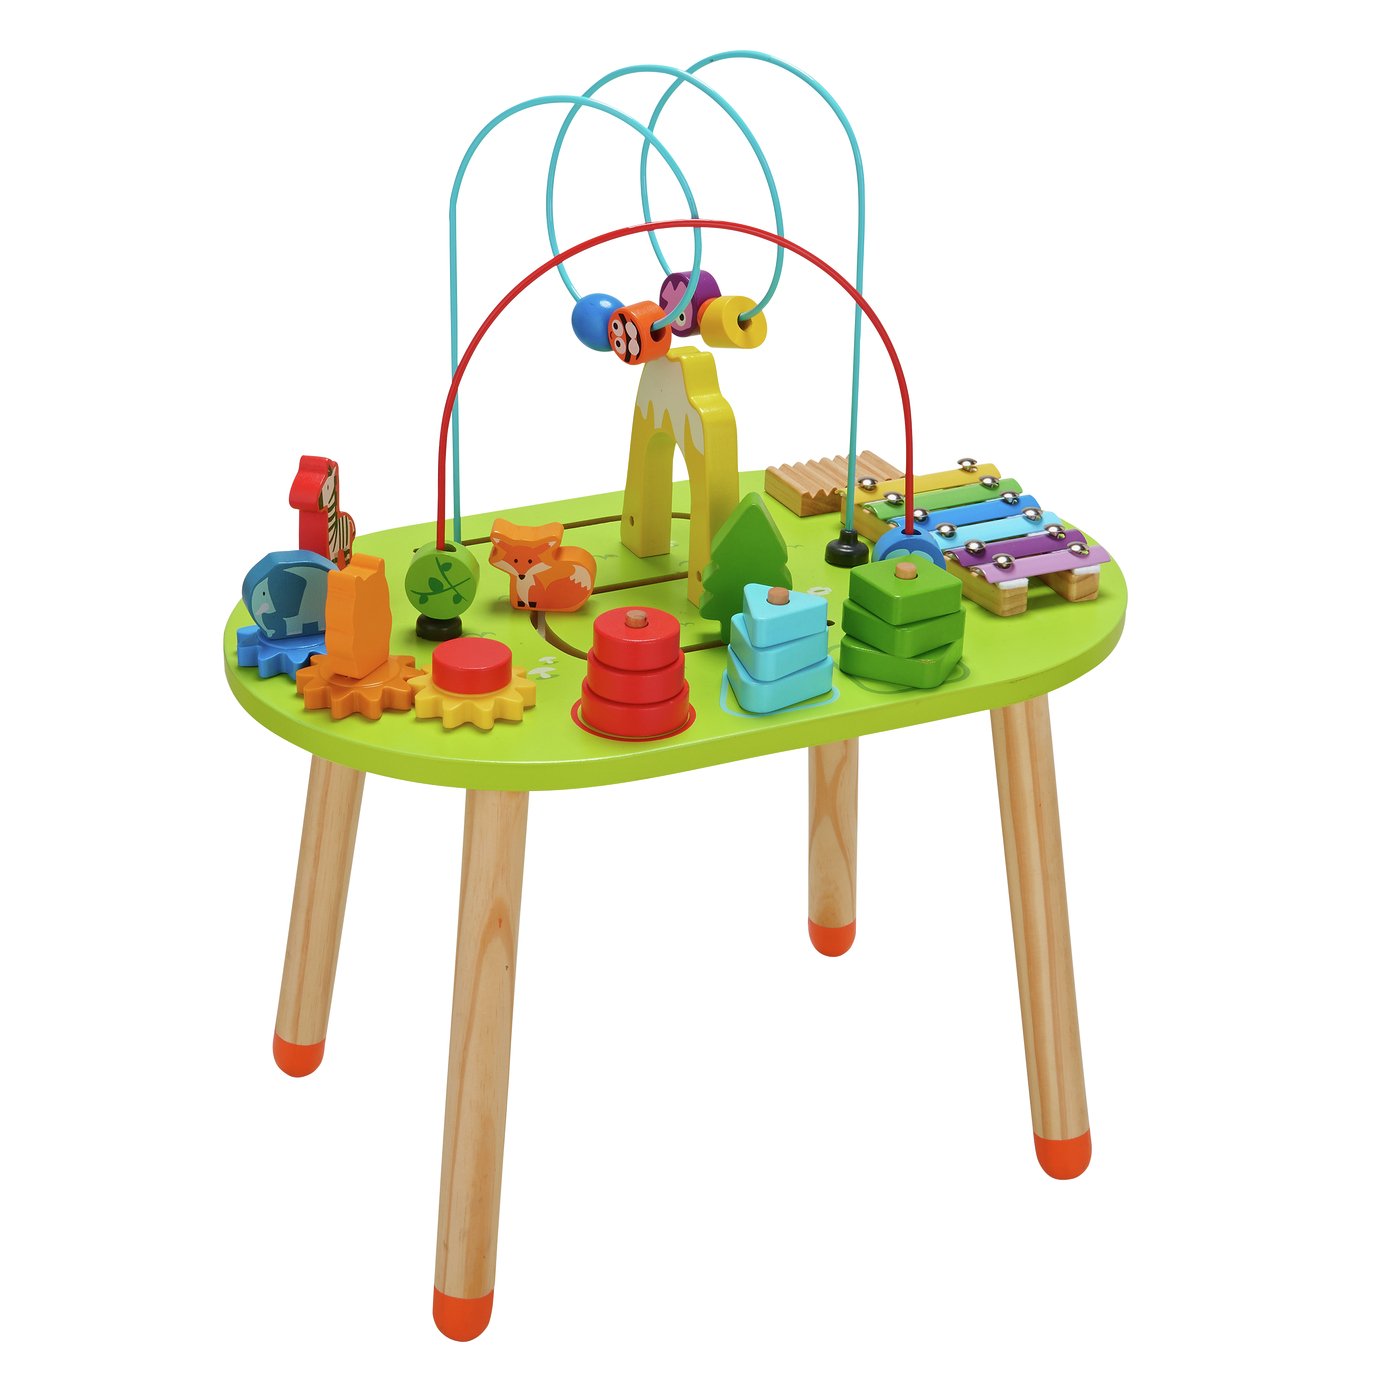 activity table baby wooden